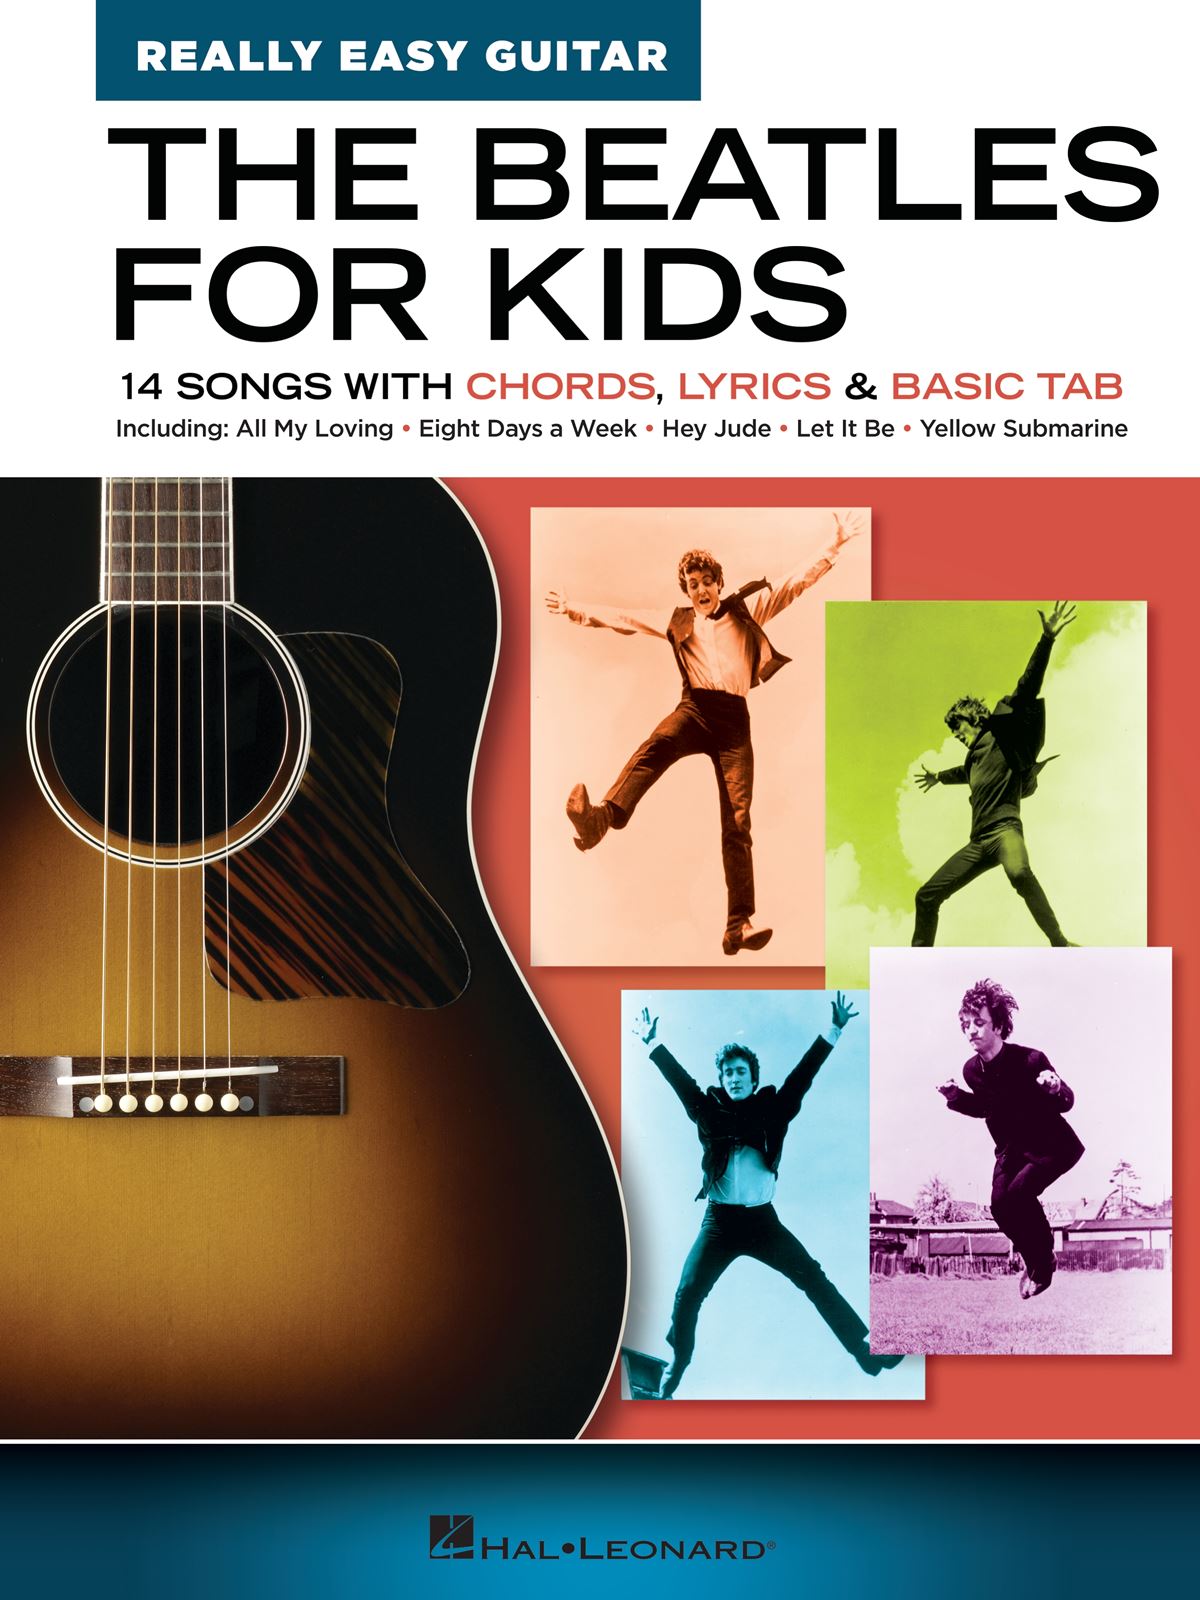 The Beatles: The Beatles for Kids - Really Easy Guitar Series: Guitar Solo: